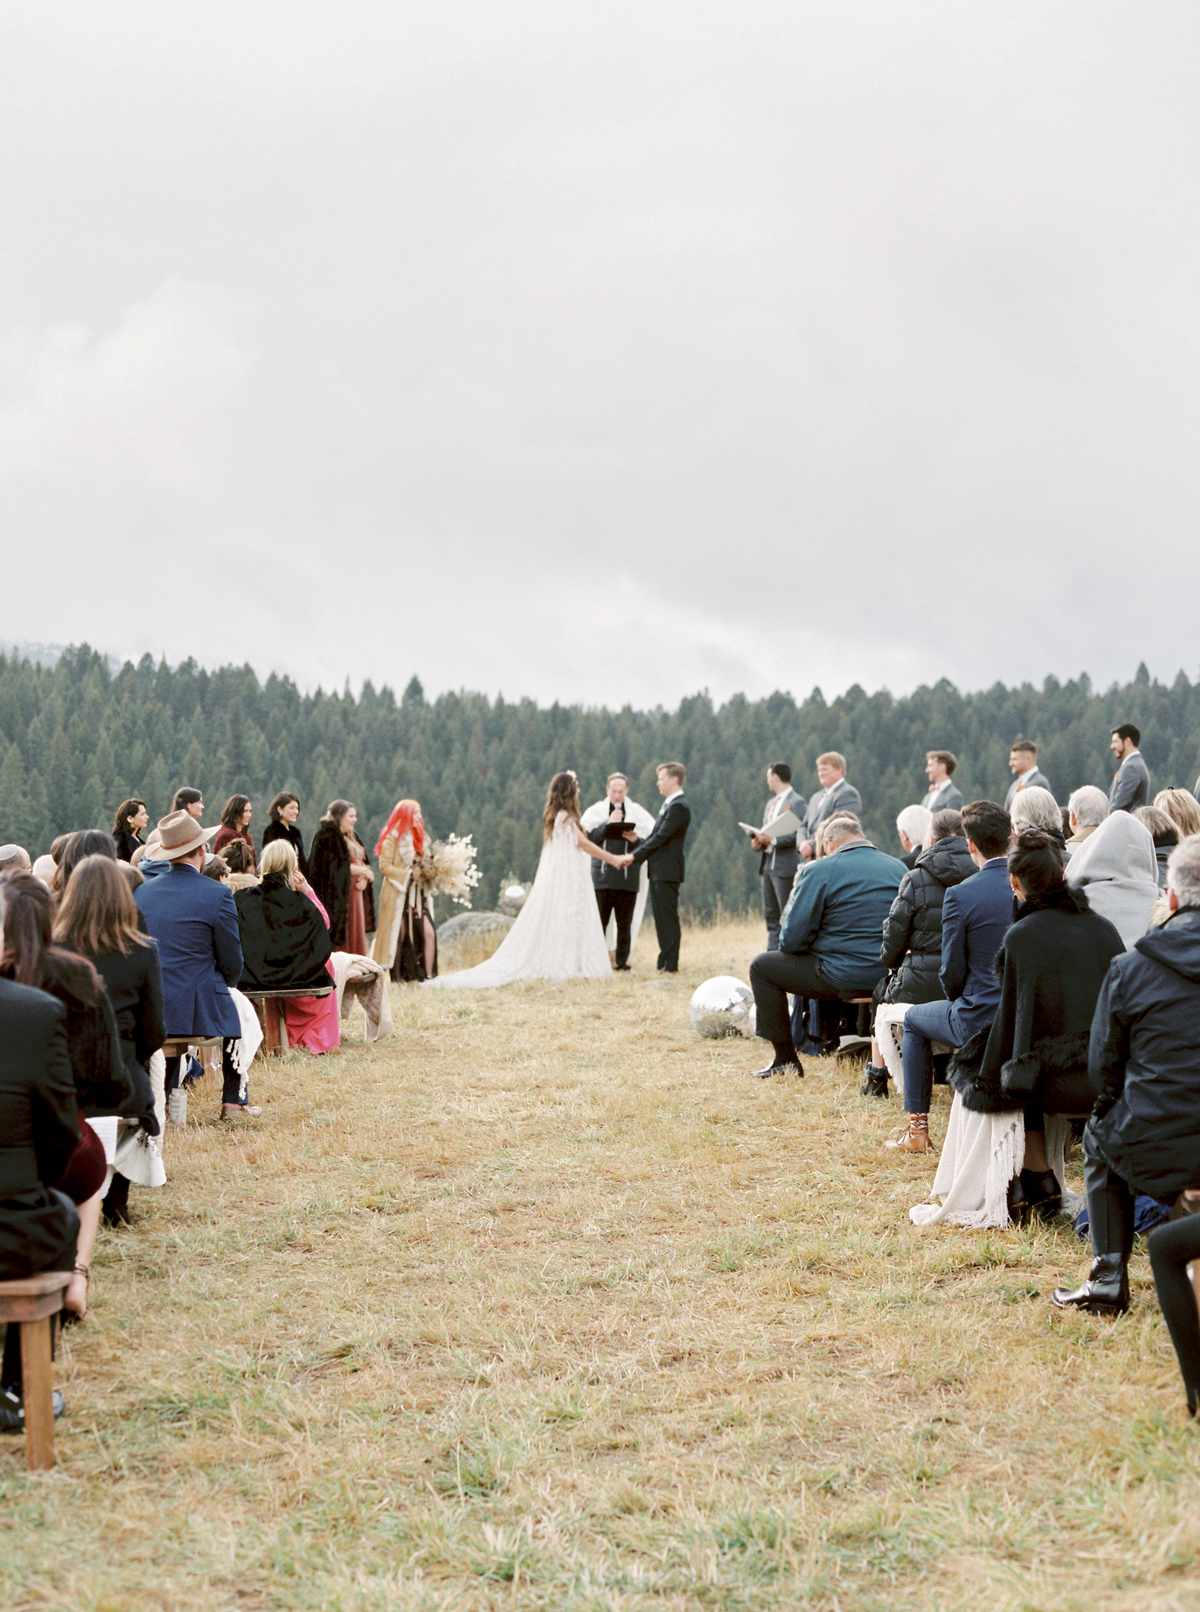 outdoor wedding ceremony with pine trees in background